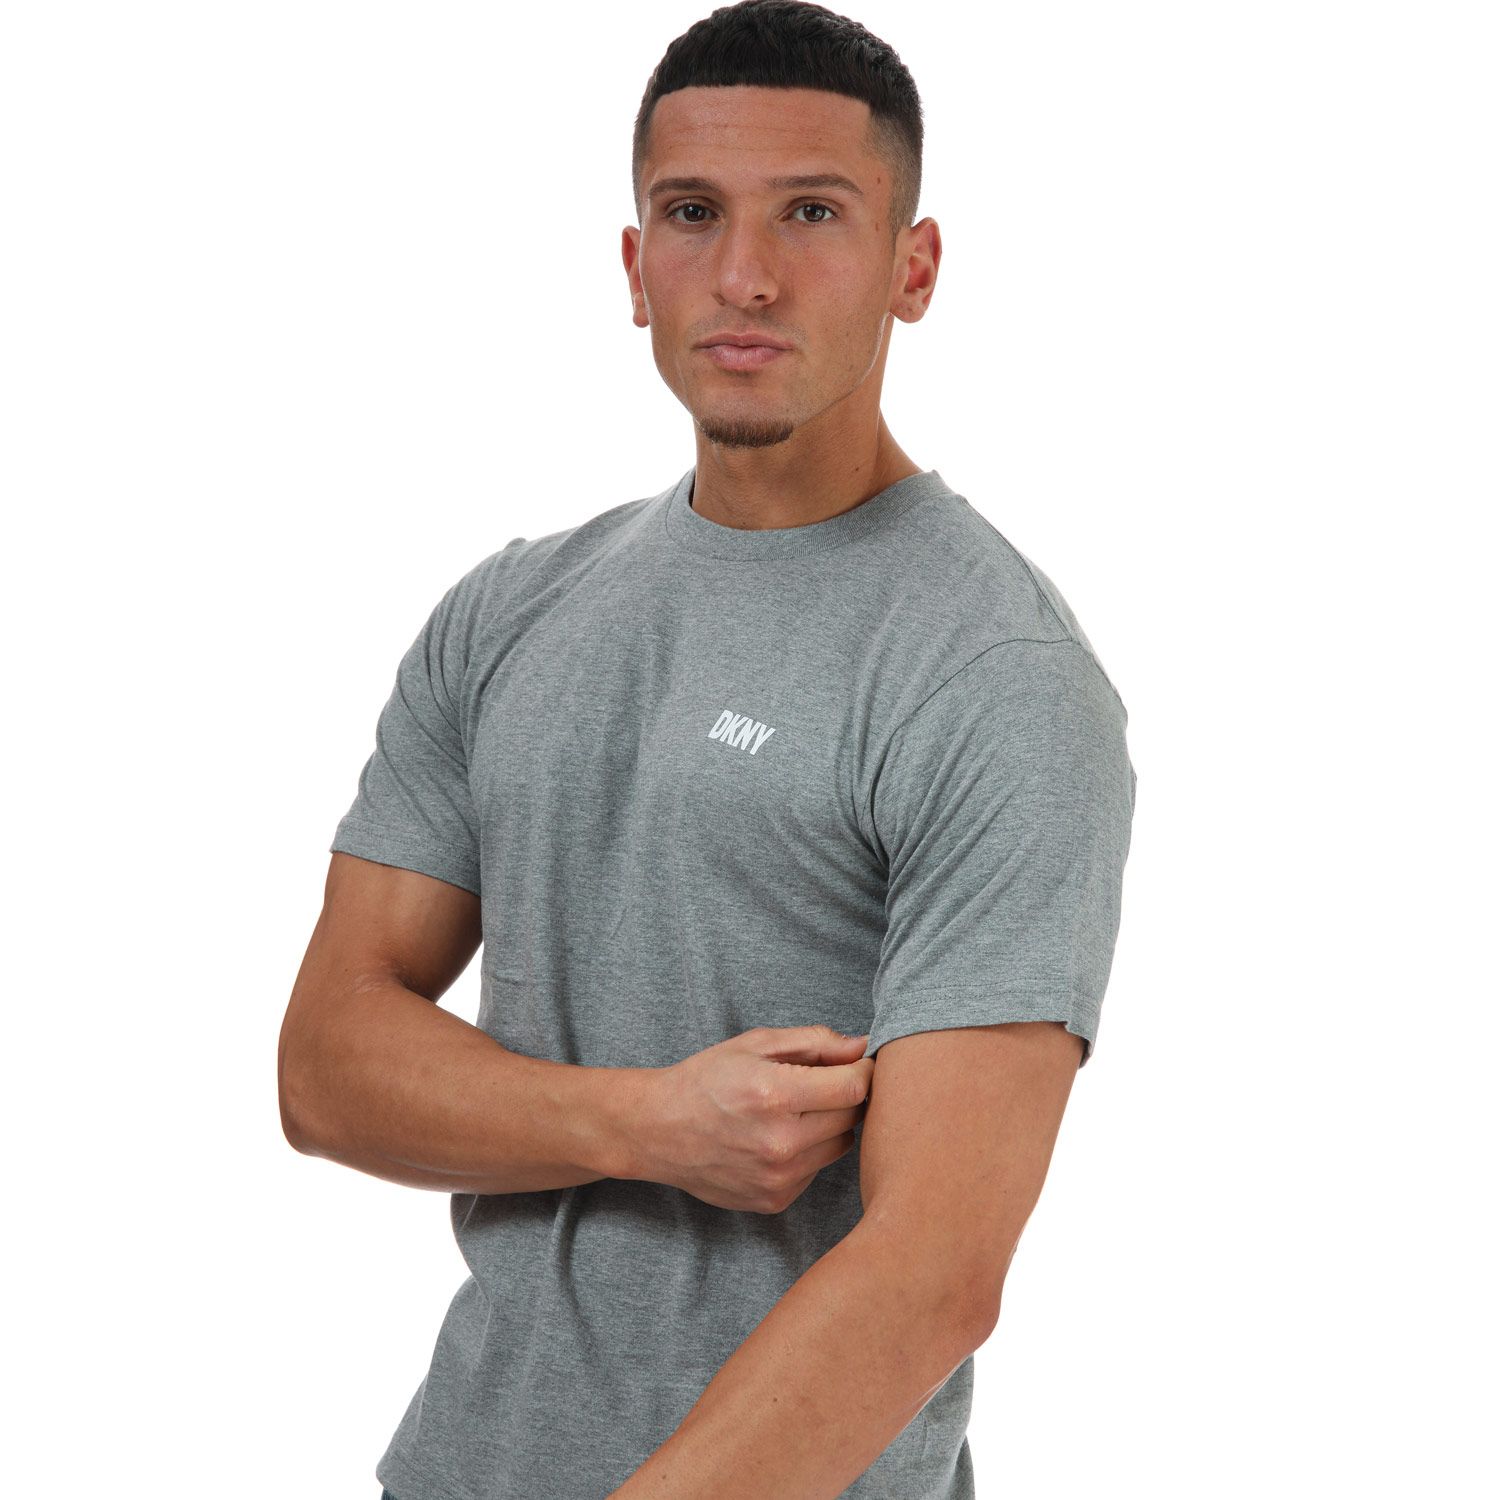 olive DKNY Mens Giants 3 Pack Lounge T-Shirts - Get The Label